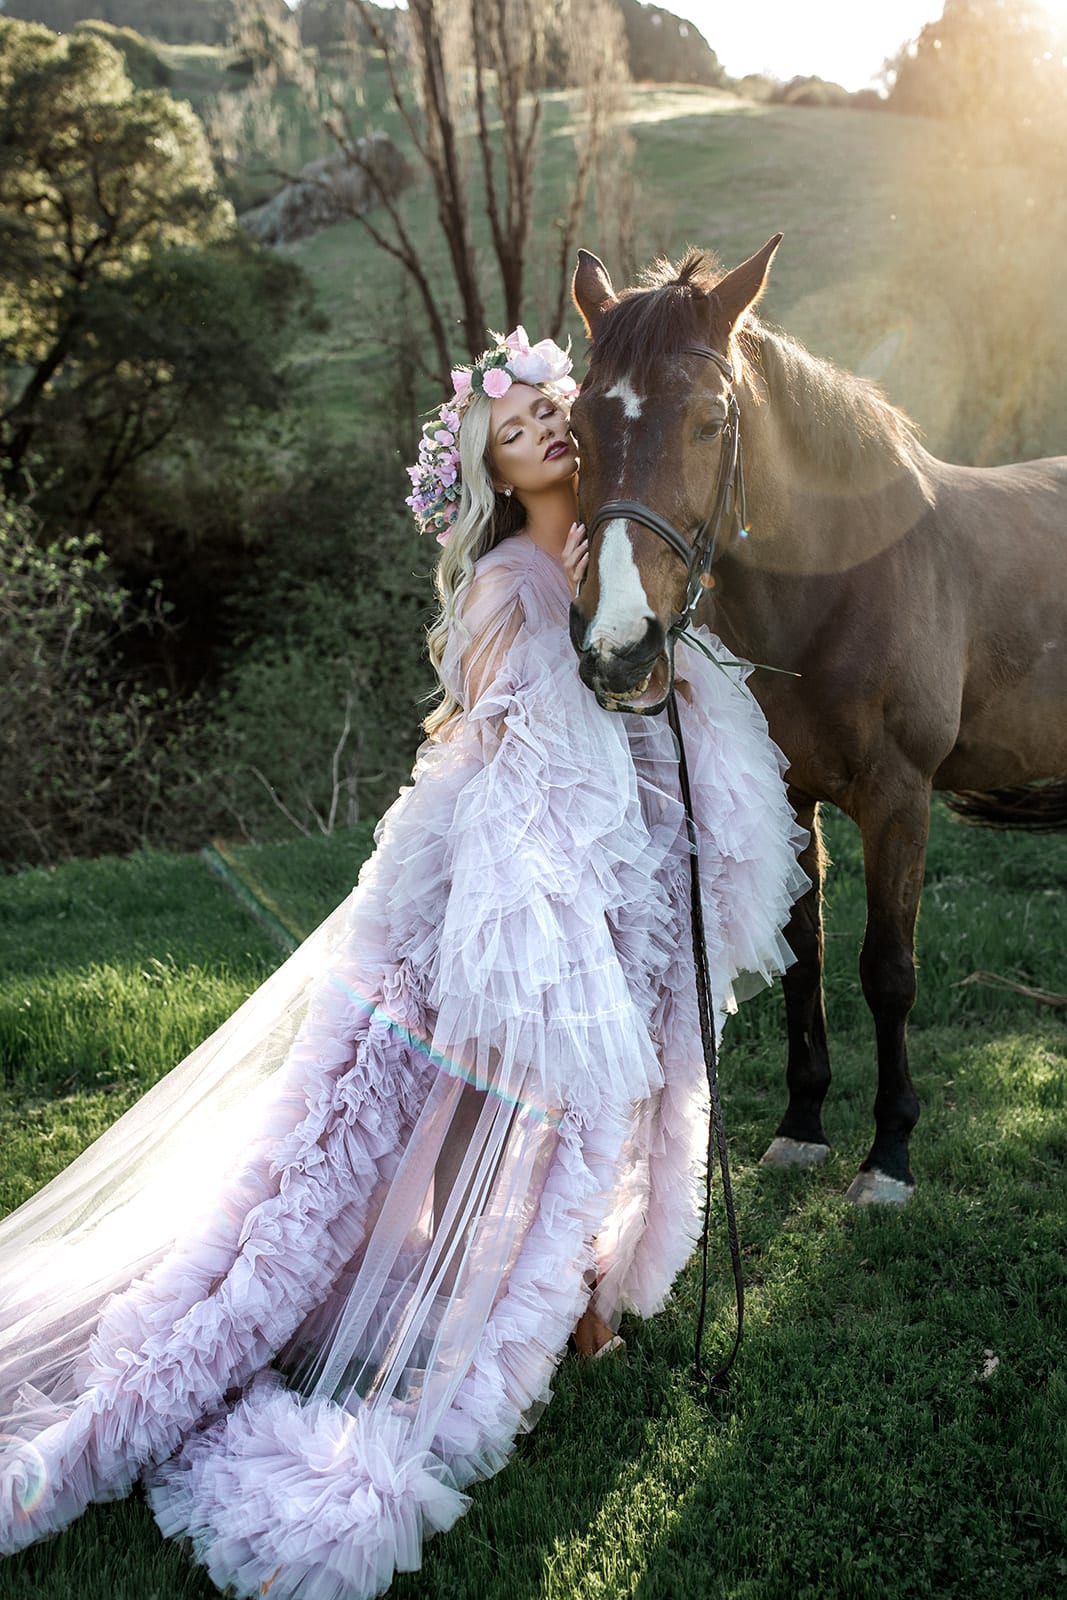 Model wearing tulle bridal robe stands next to horse